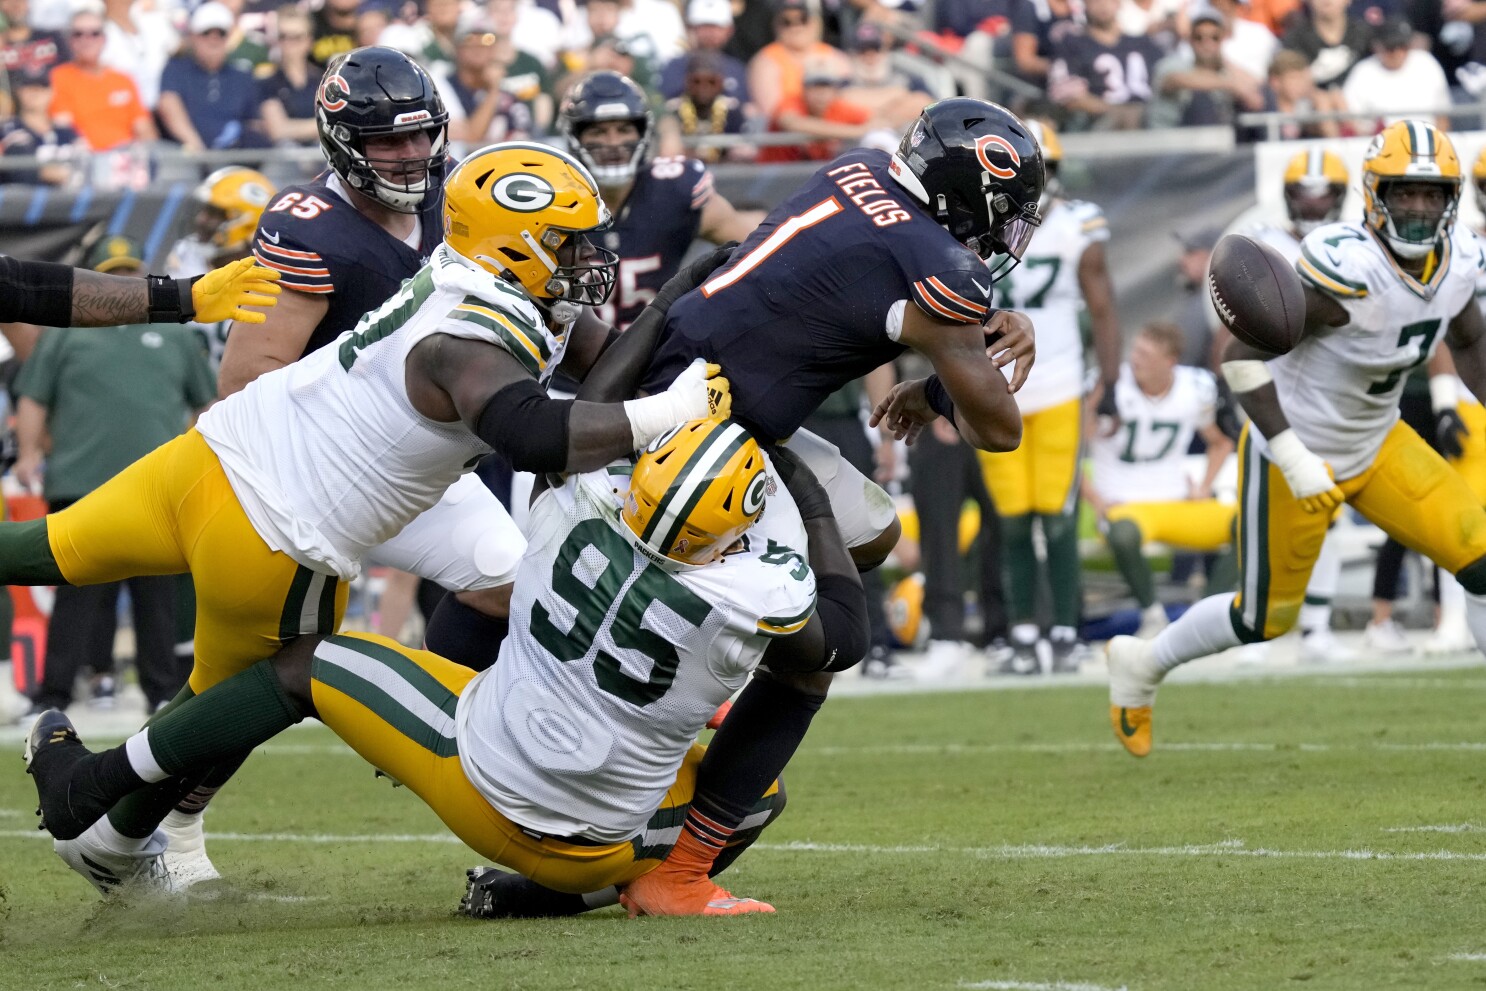 Packers News: Thursday Night Football bears down on the Packers